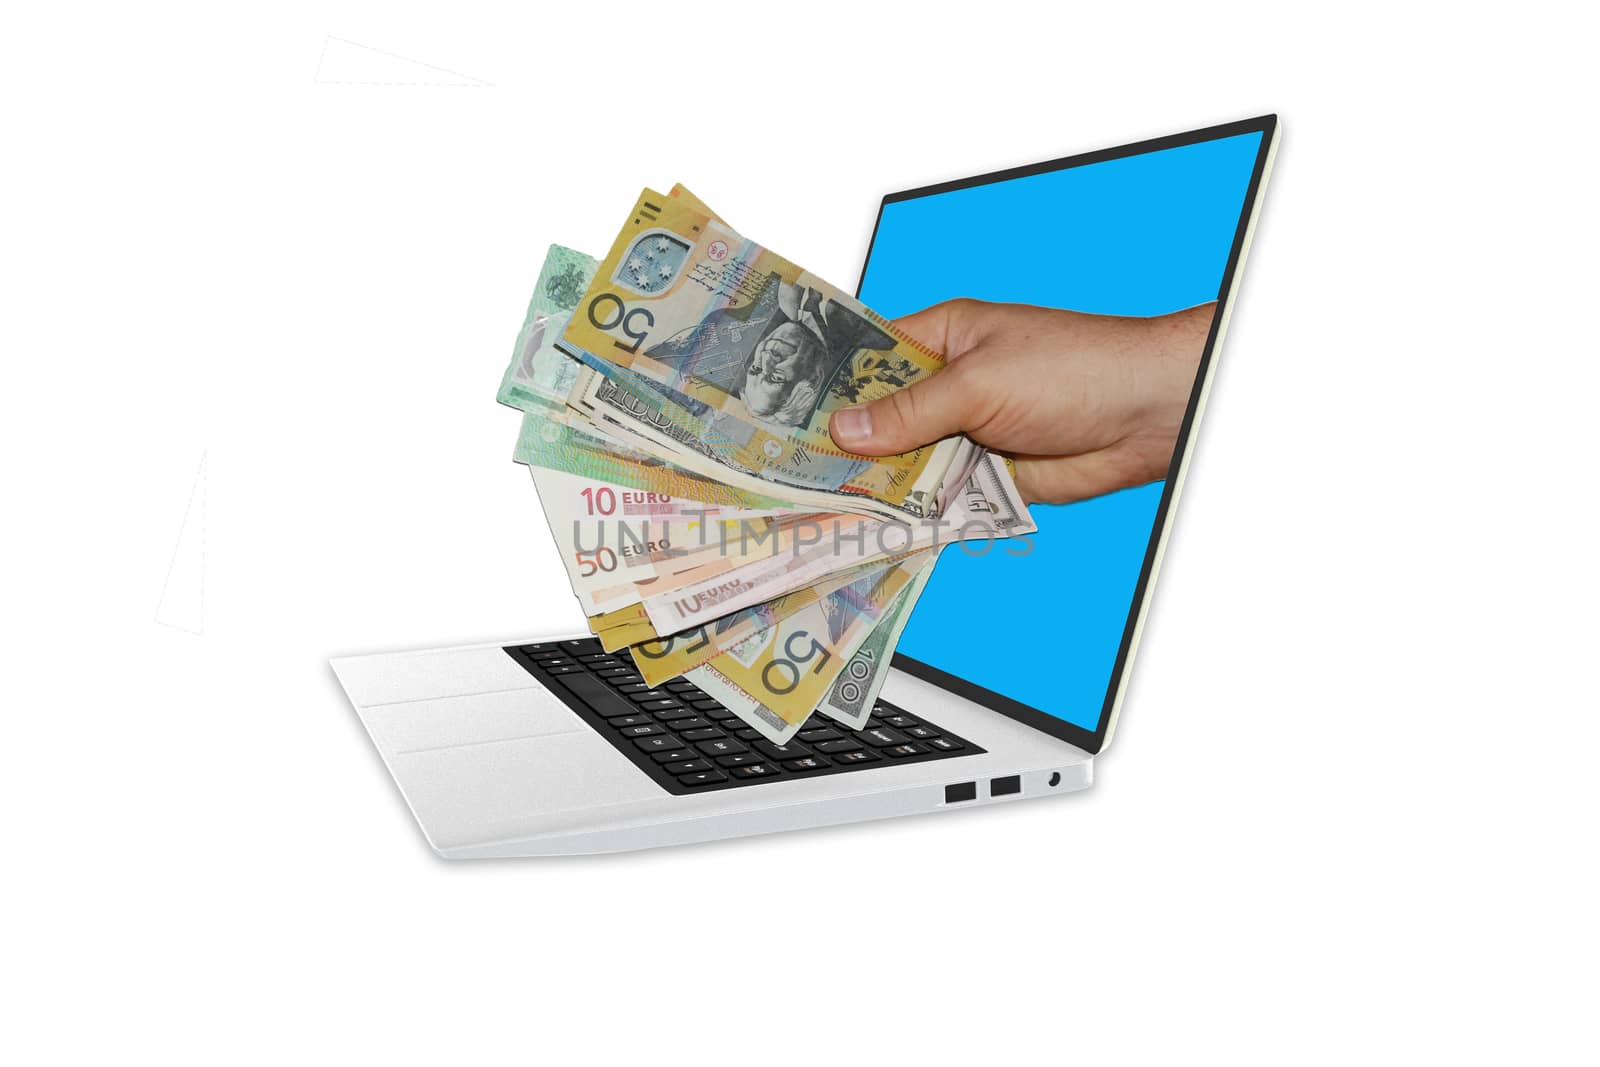 Hand holding cash money out of  3D model of laptop computer by HD_premium_shots